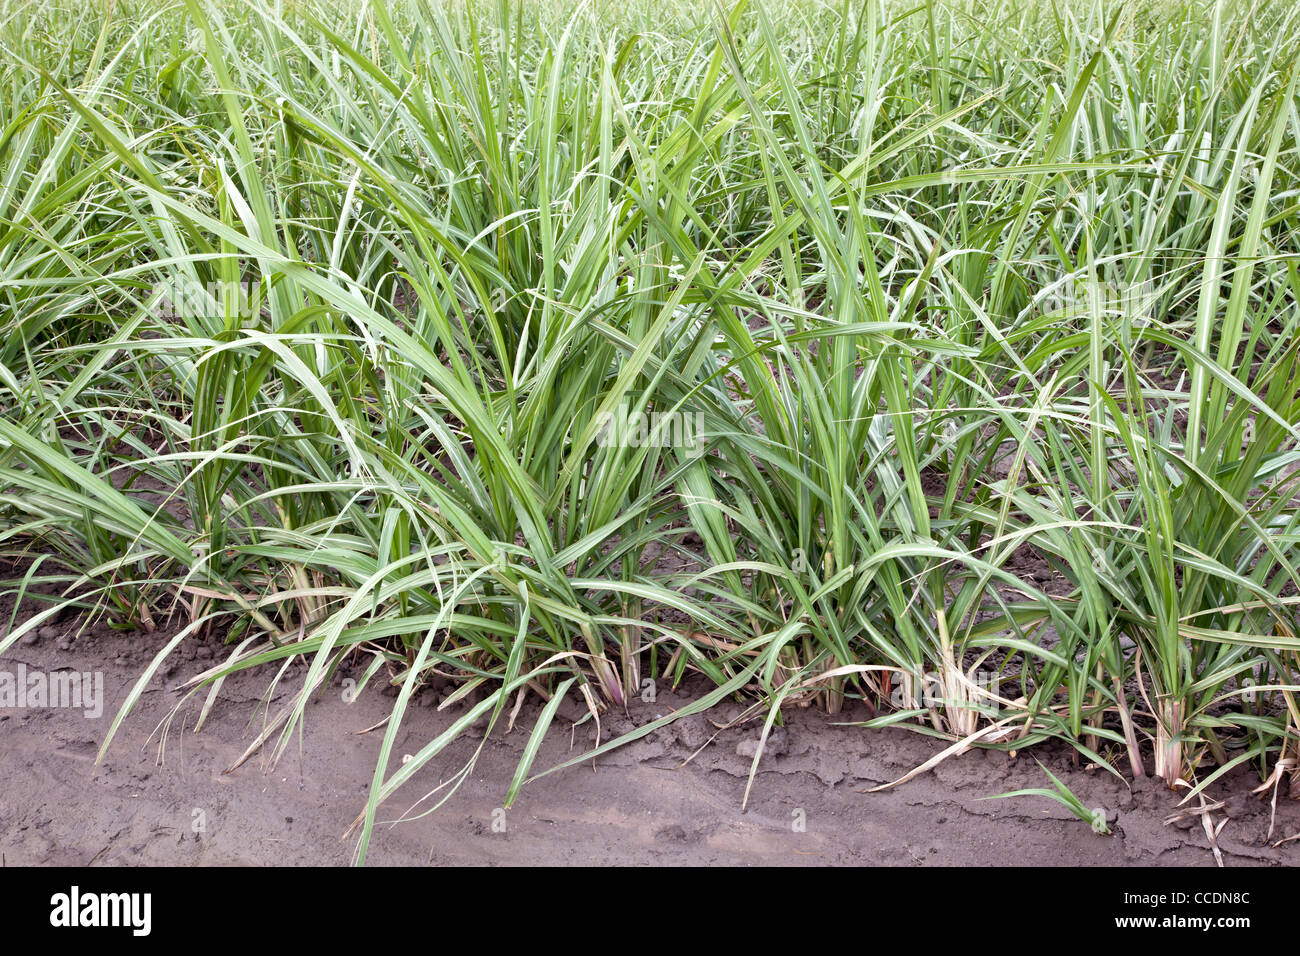 Sugar cane, young regrowth, field. Stock Photo